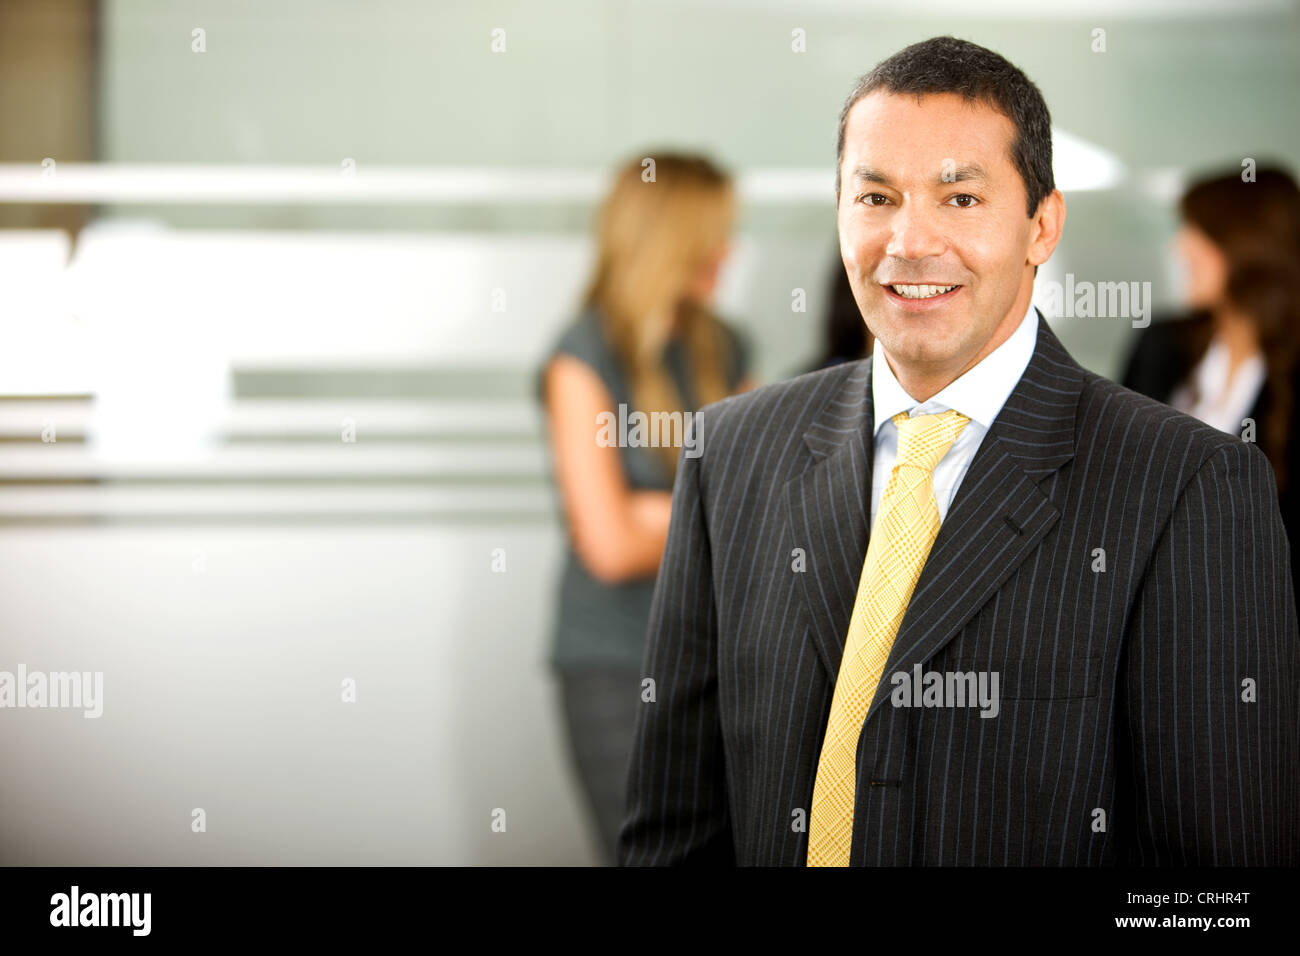 businessman wearing a black suit with yellow tie, smiling Stock Photo